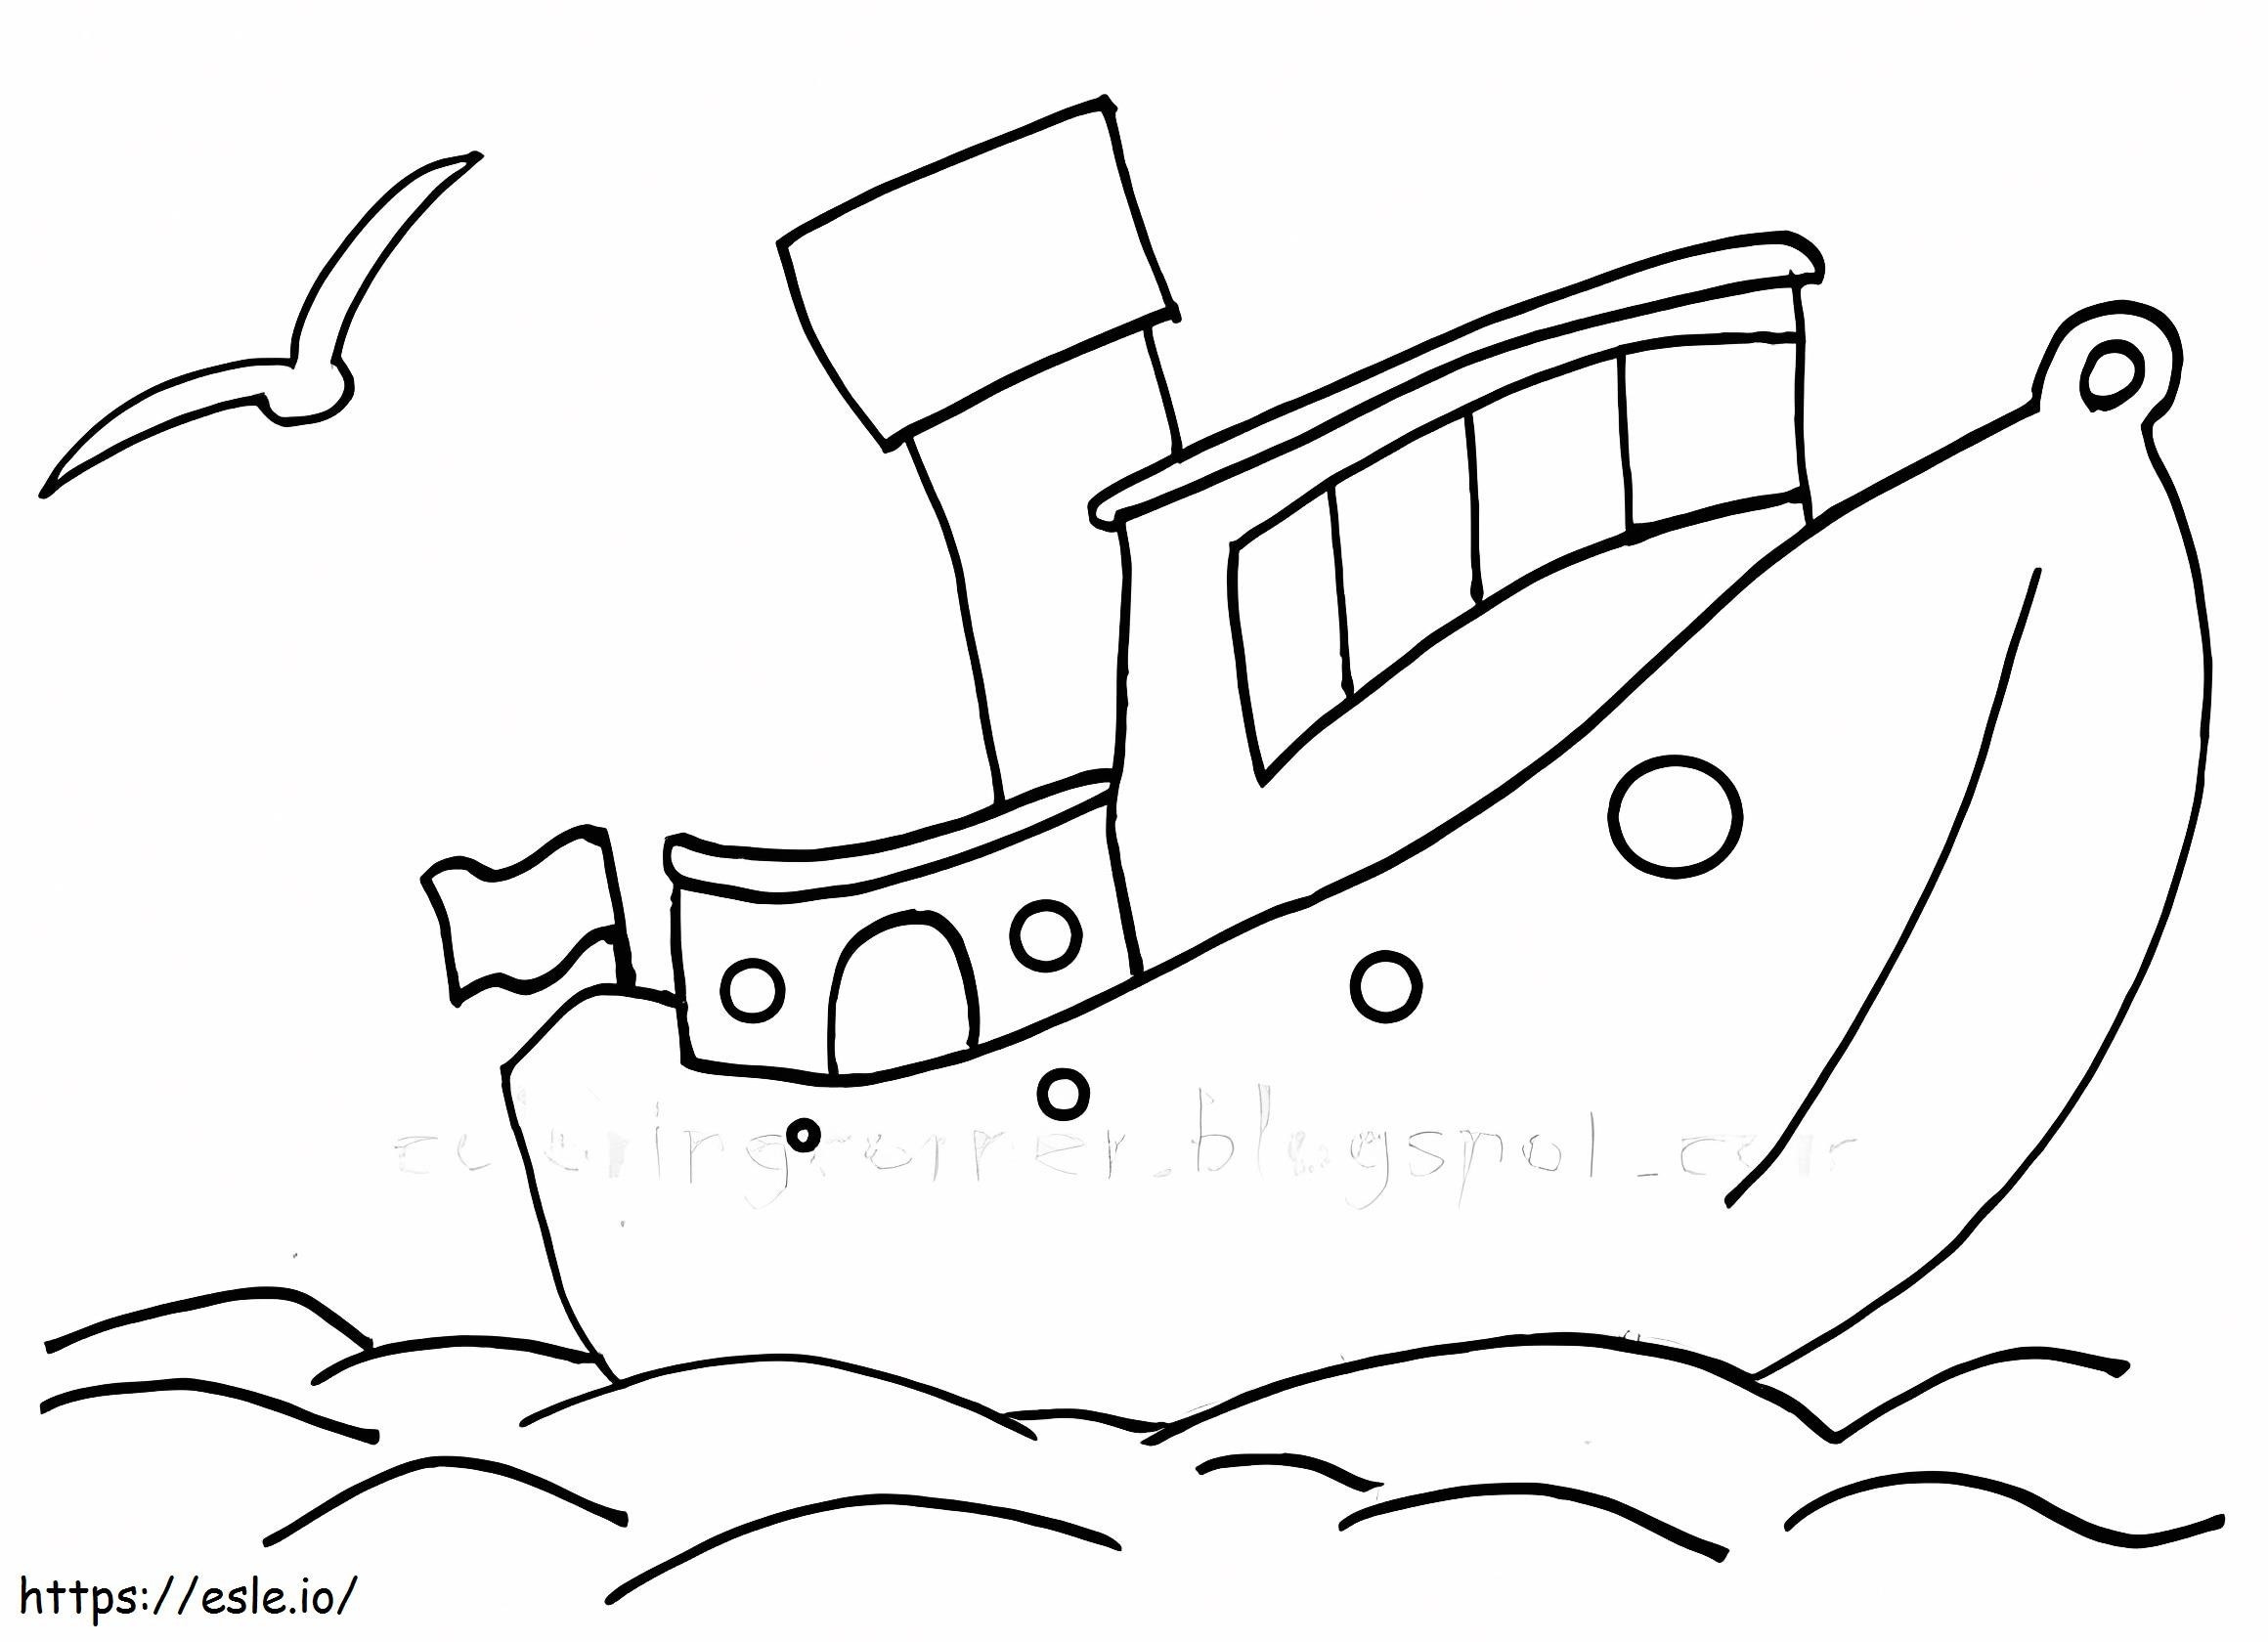 Boat 2 coloring page